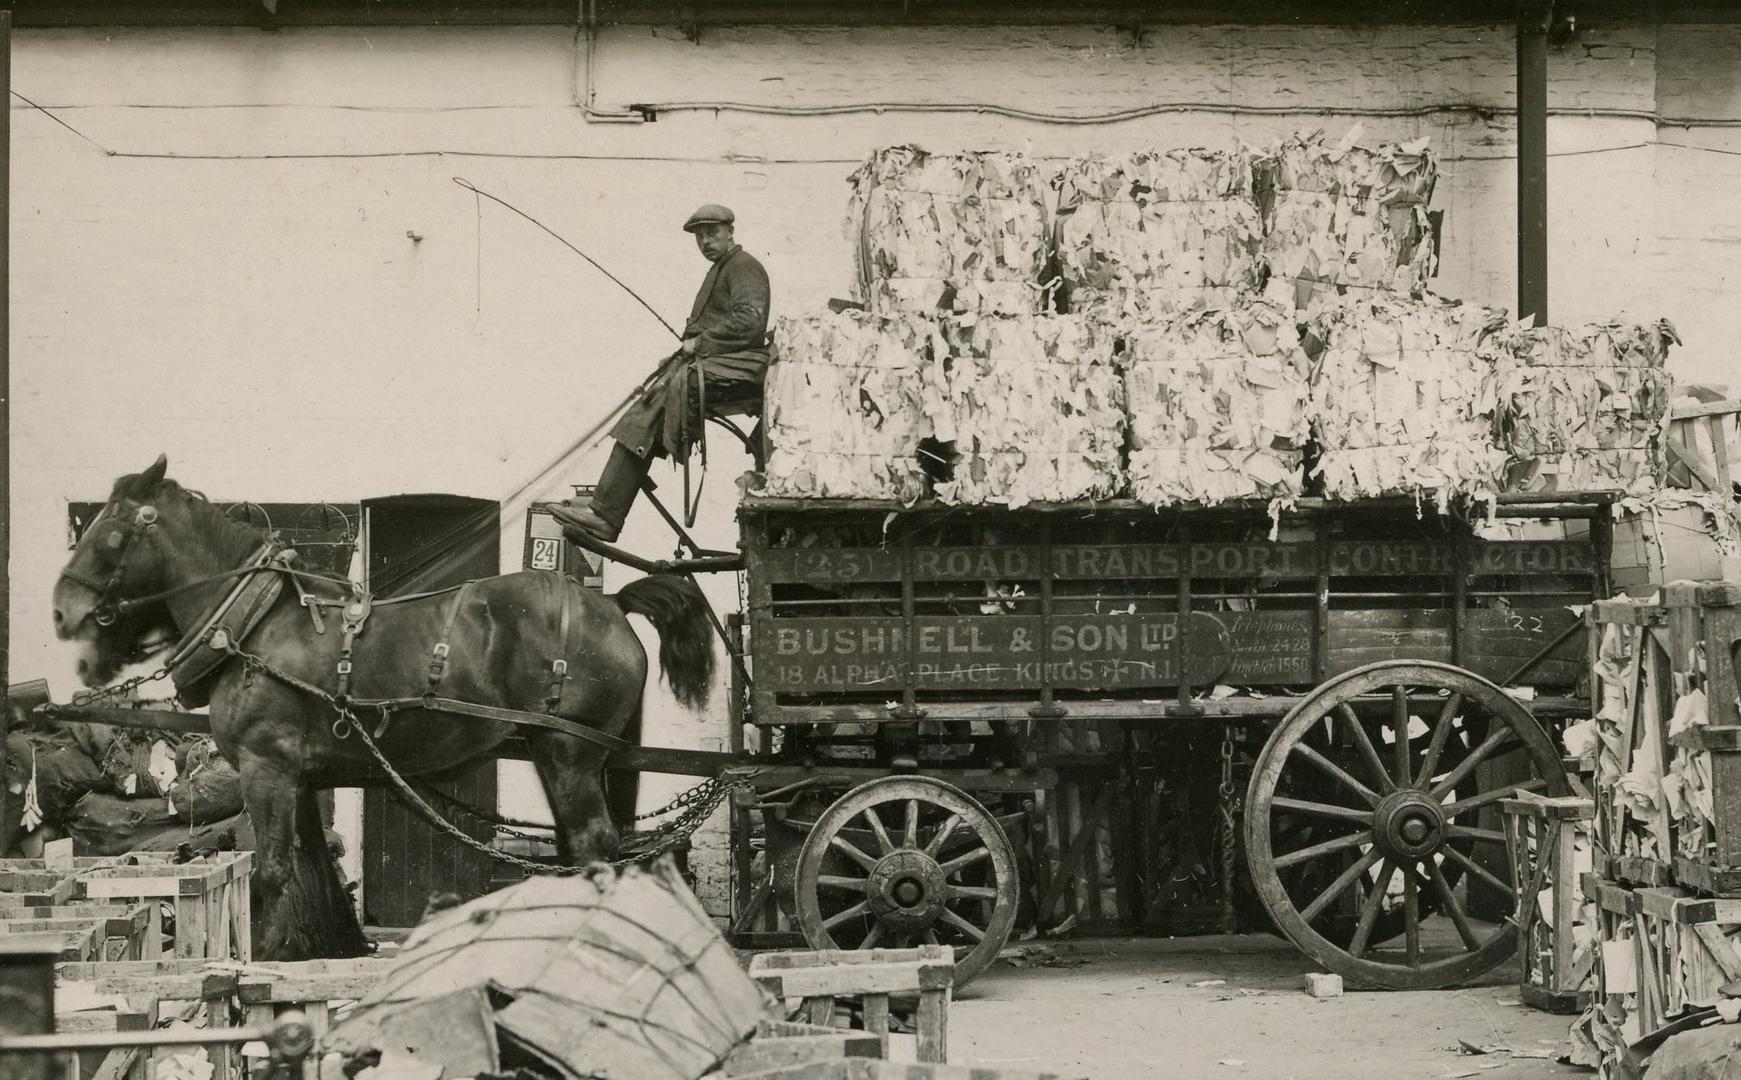 Working horses in a waste paper works